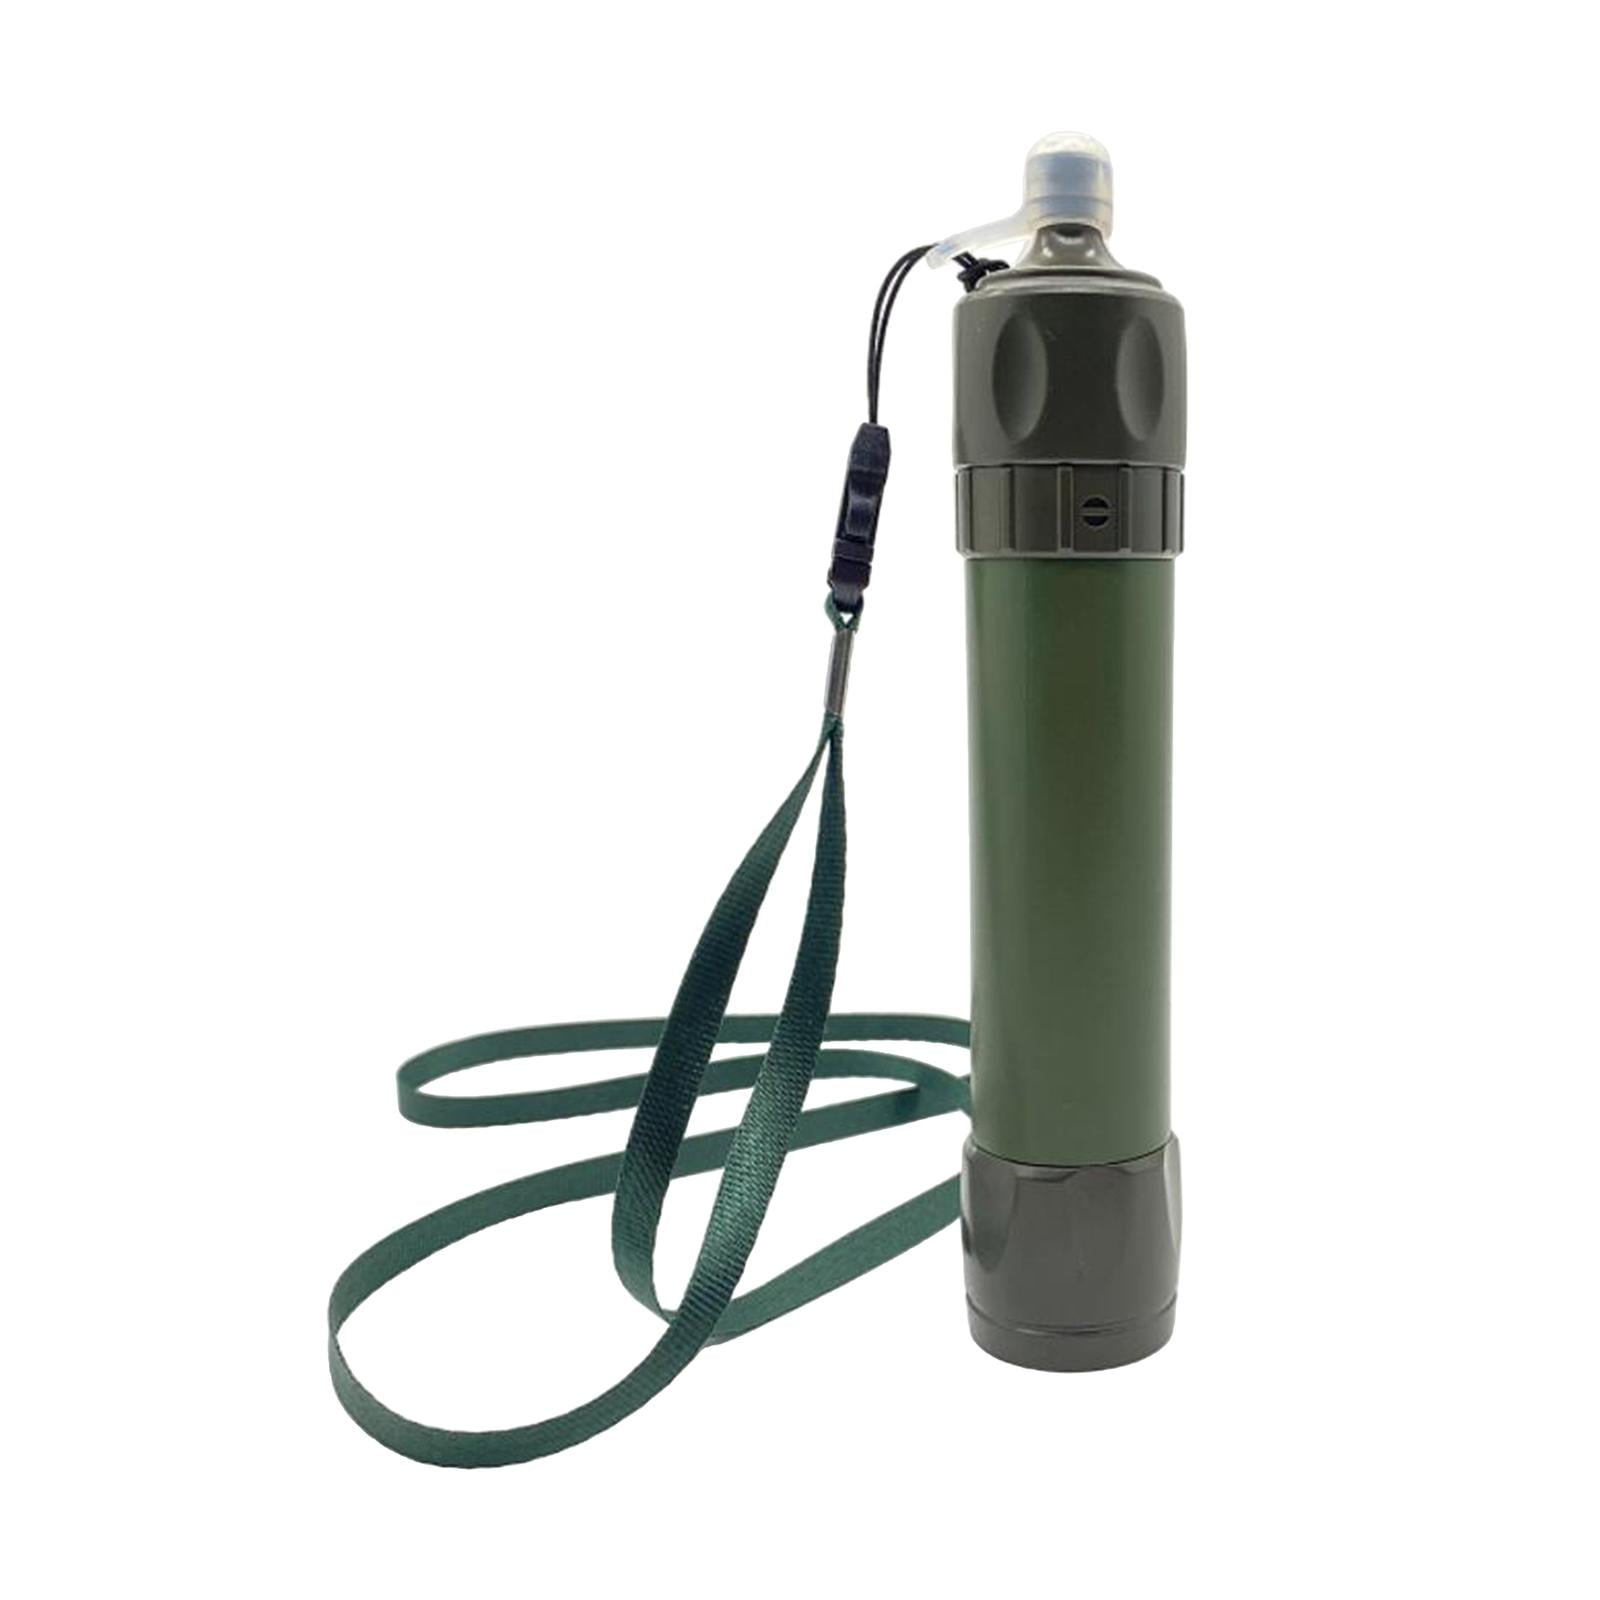 BonTime 1pc Portable Pressure Water Filter Purifier Wild Drinking Water Hiking Camping Travel Outdoors 